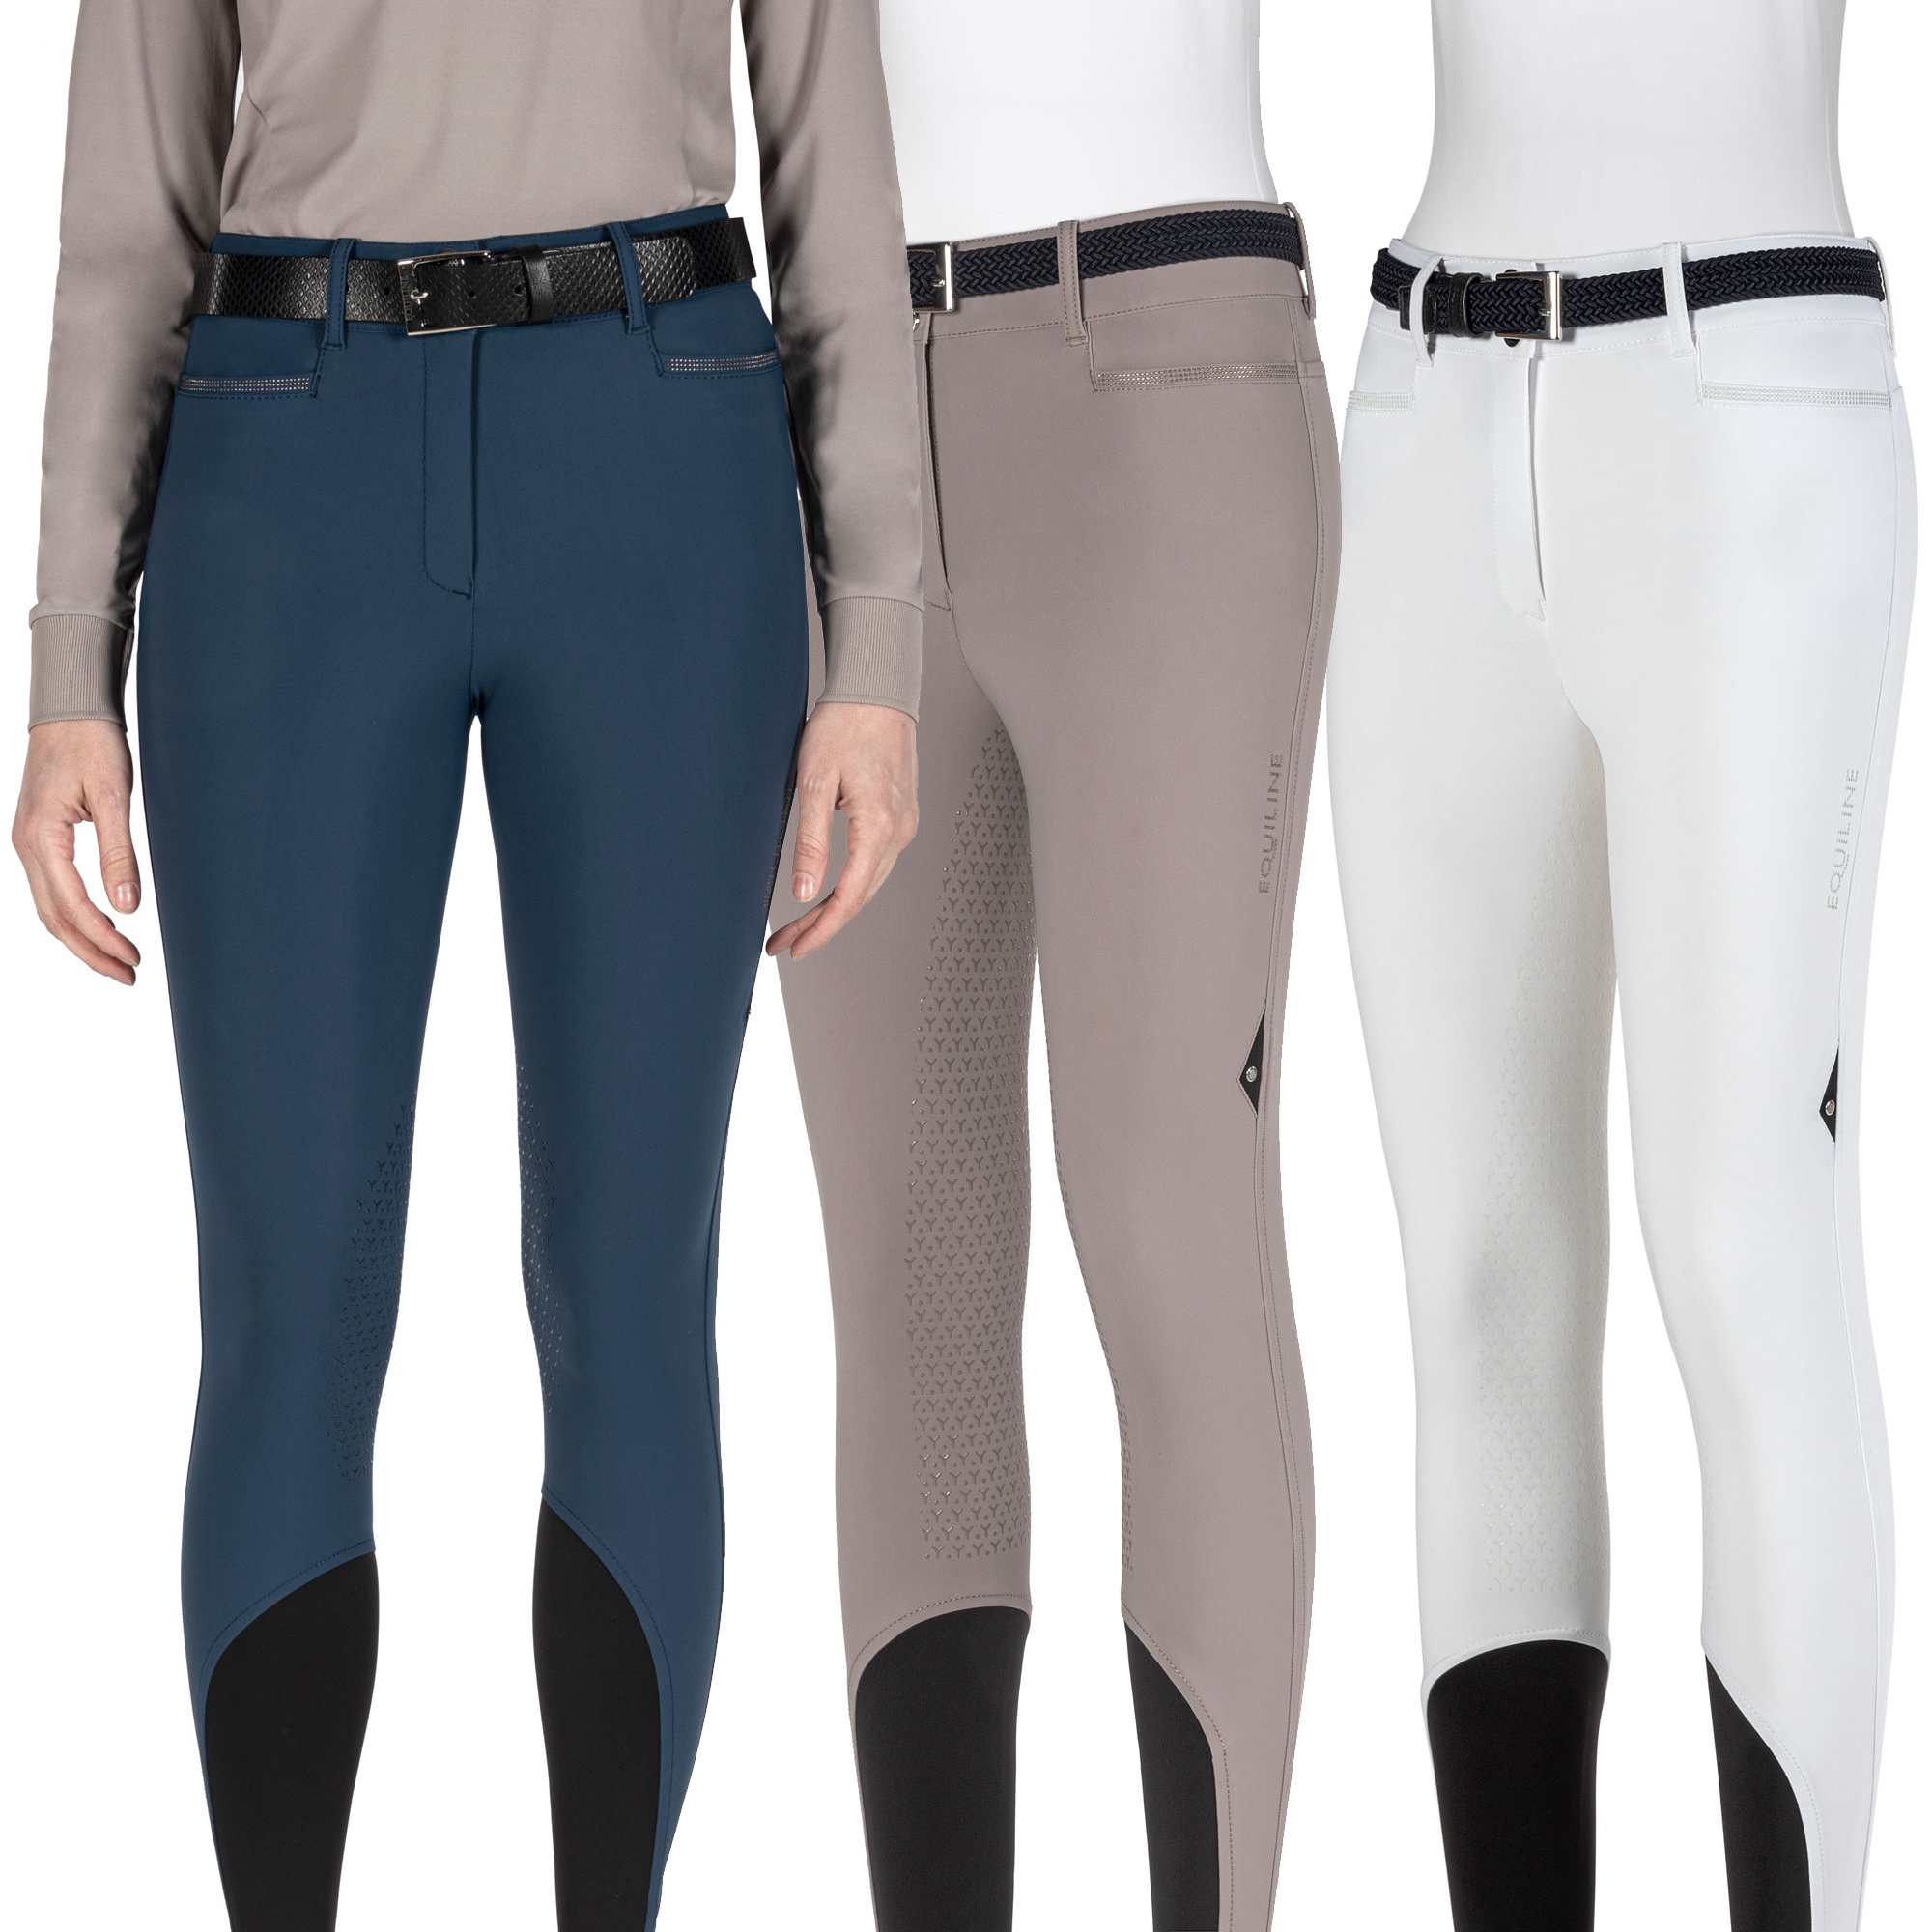 These full grip riding breeches from the Eqode collection by Equiline